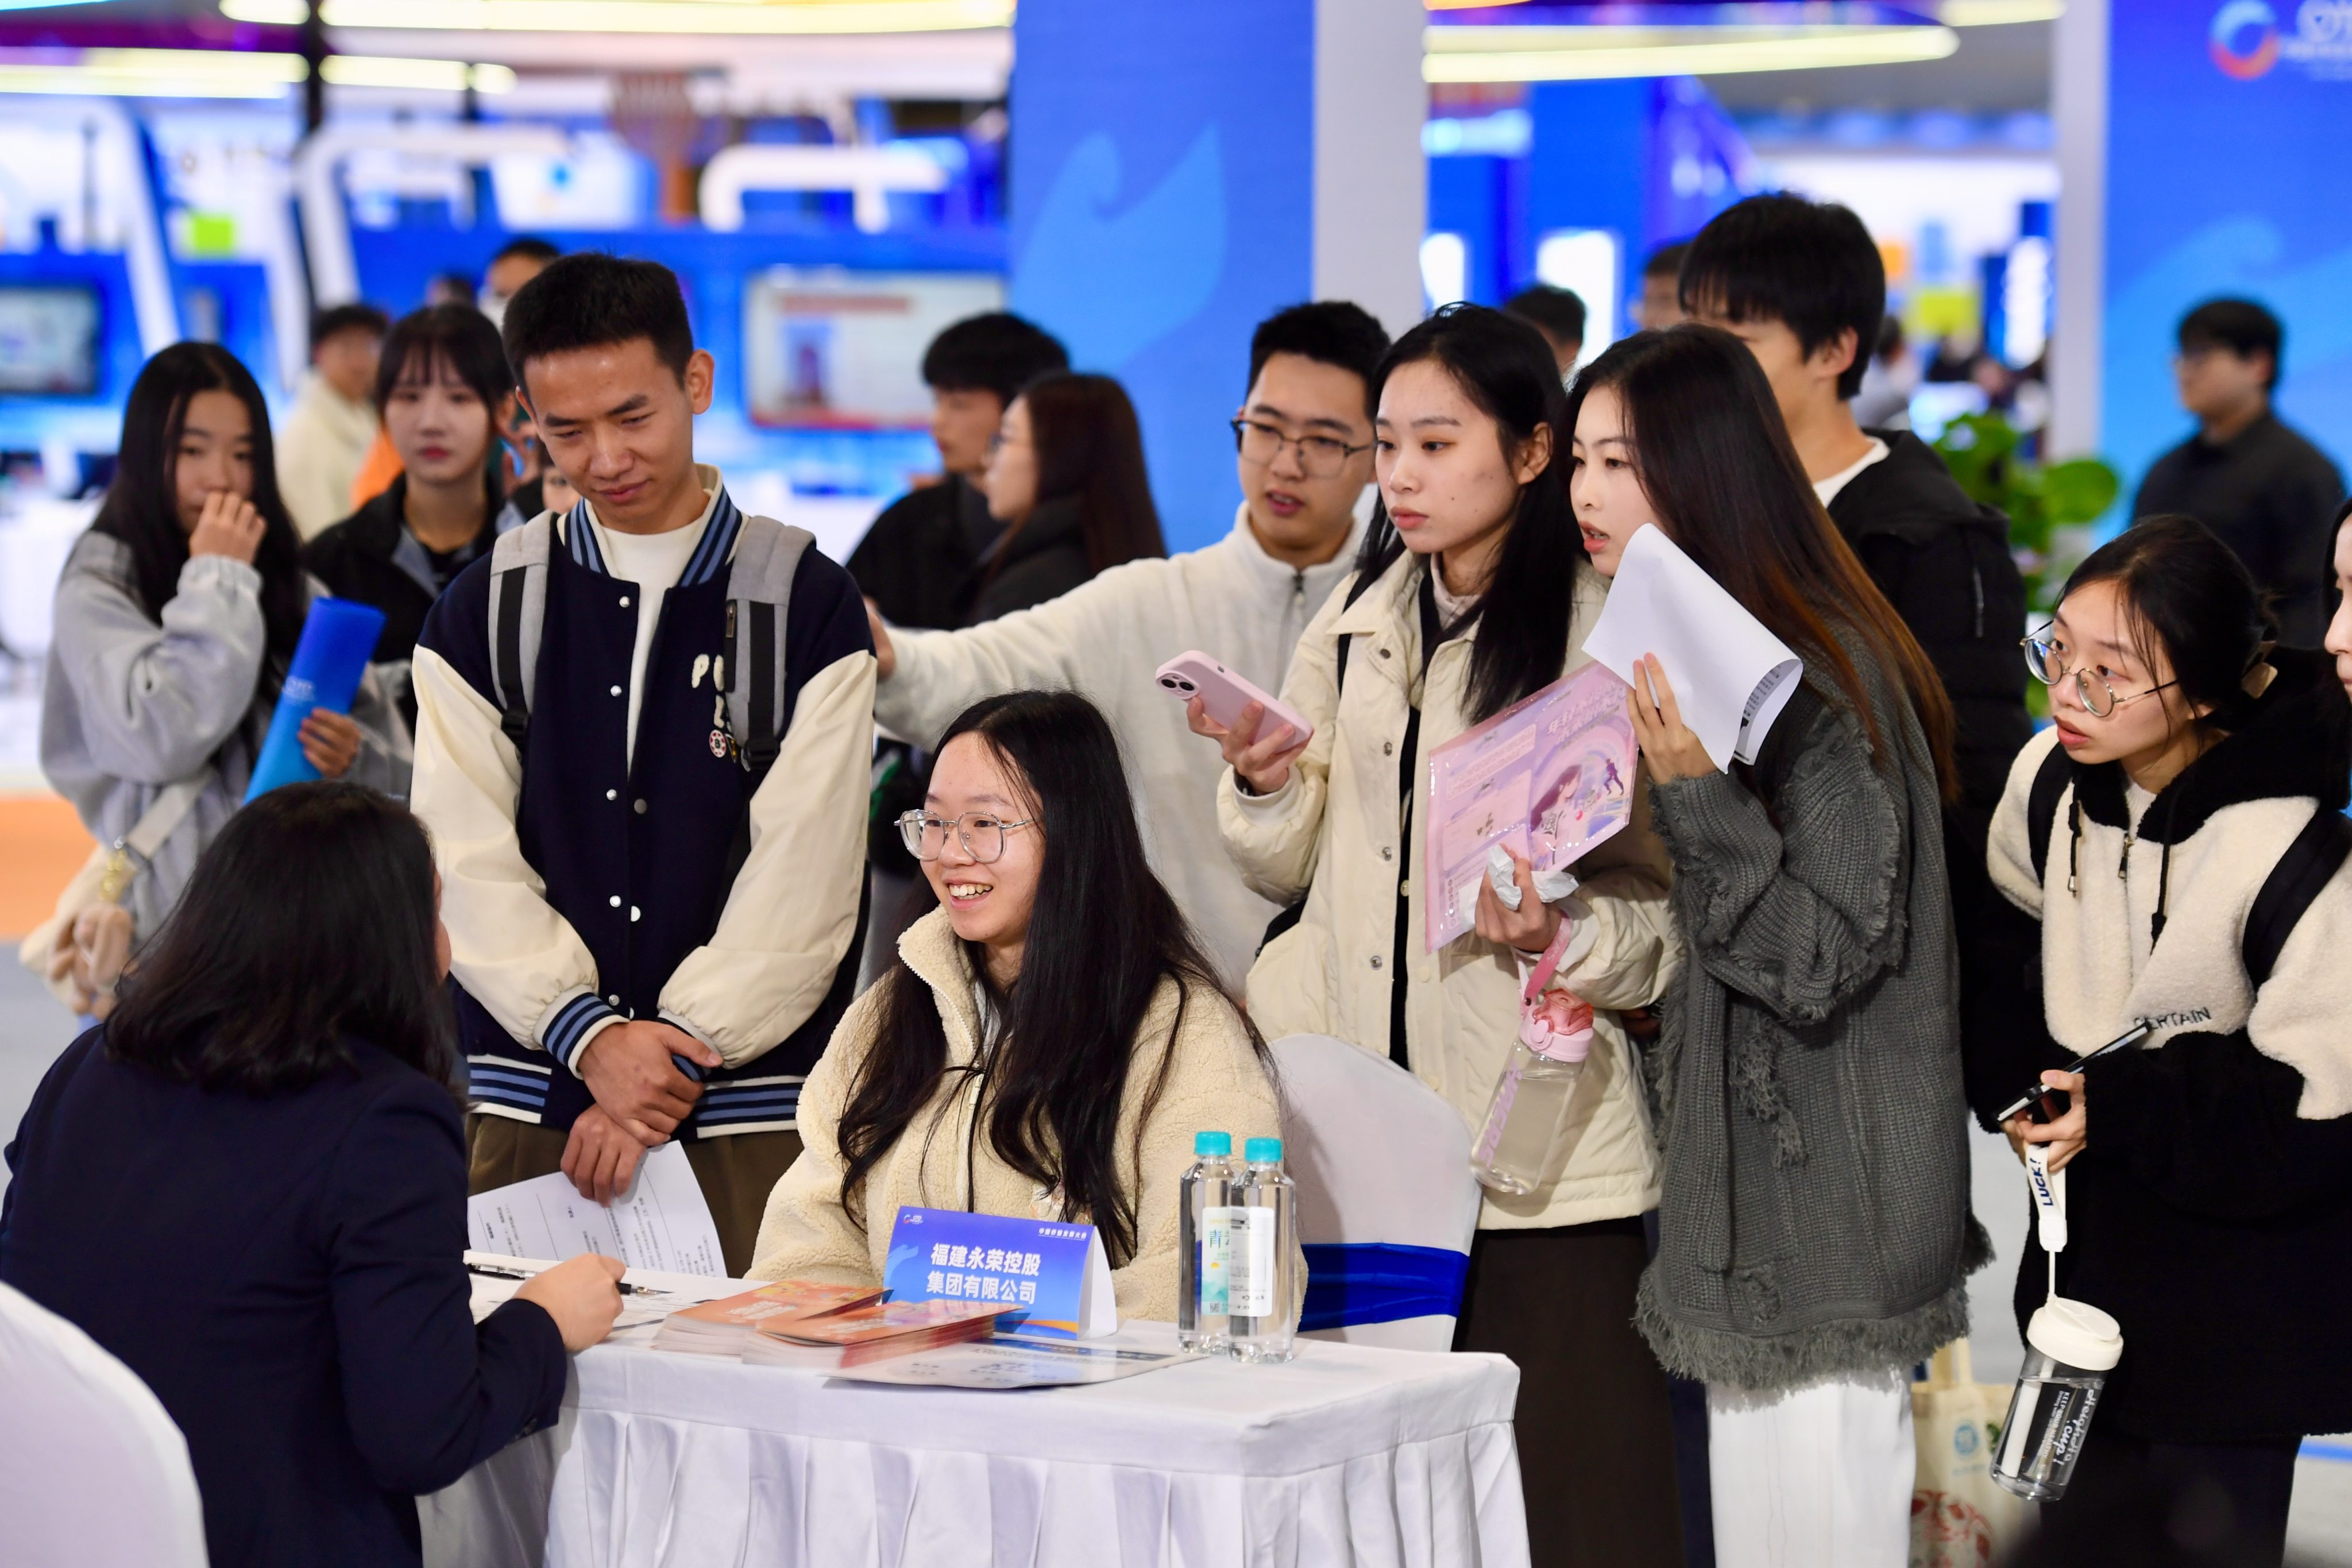 Many young Chinese are struggling to find a good job in the current climate. Photo: Xinhua